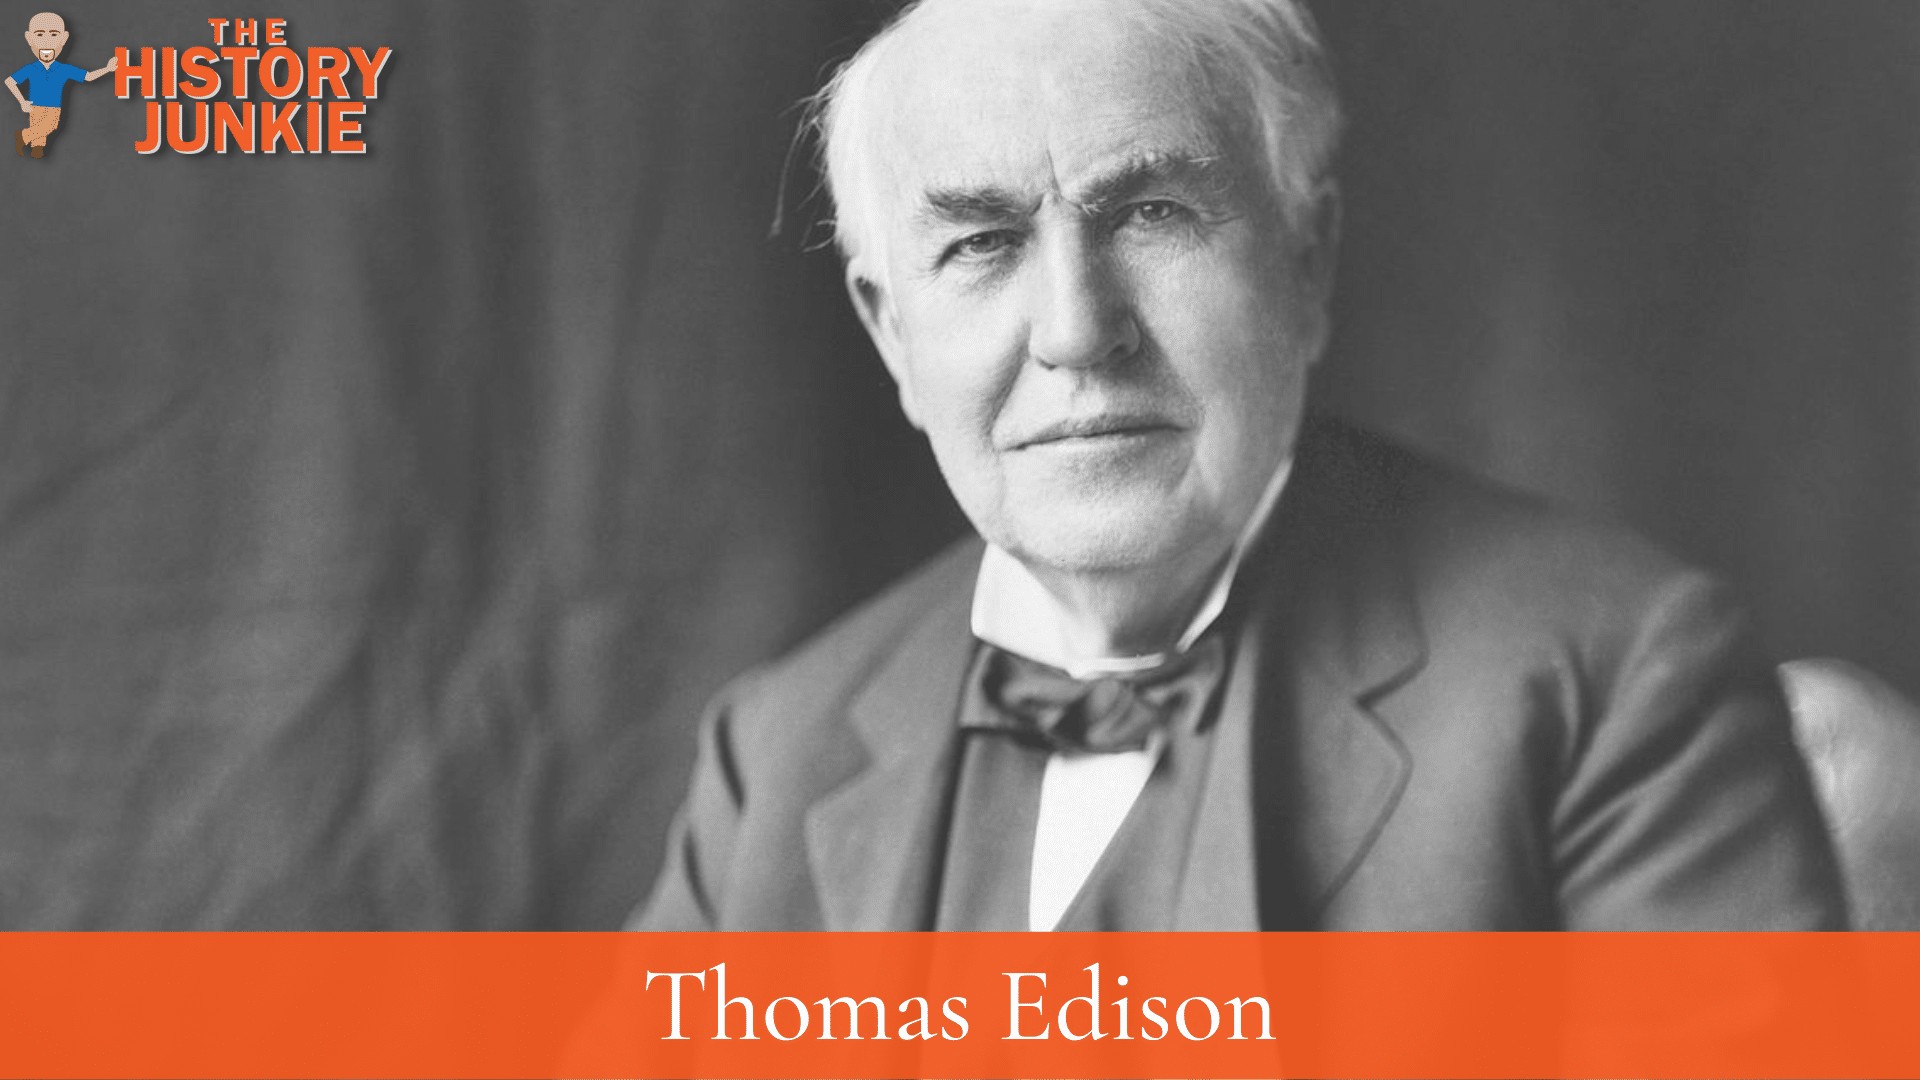 Thomas Edison Facts and Inventions - The History Junkie